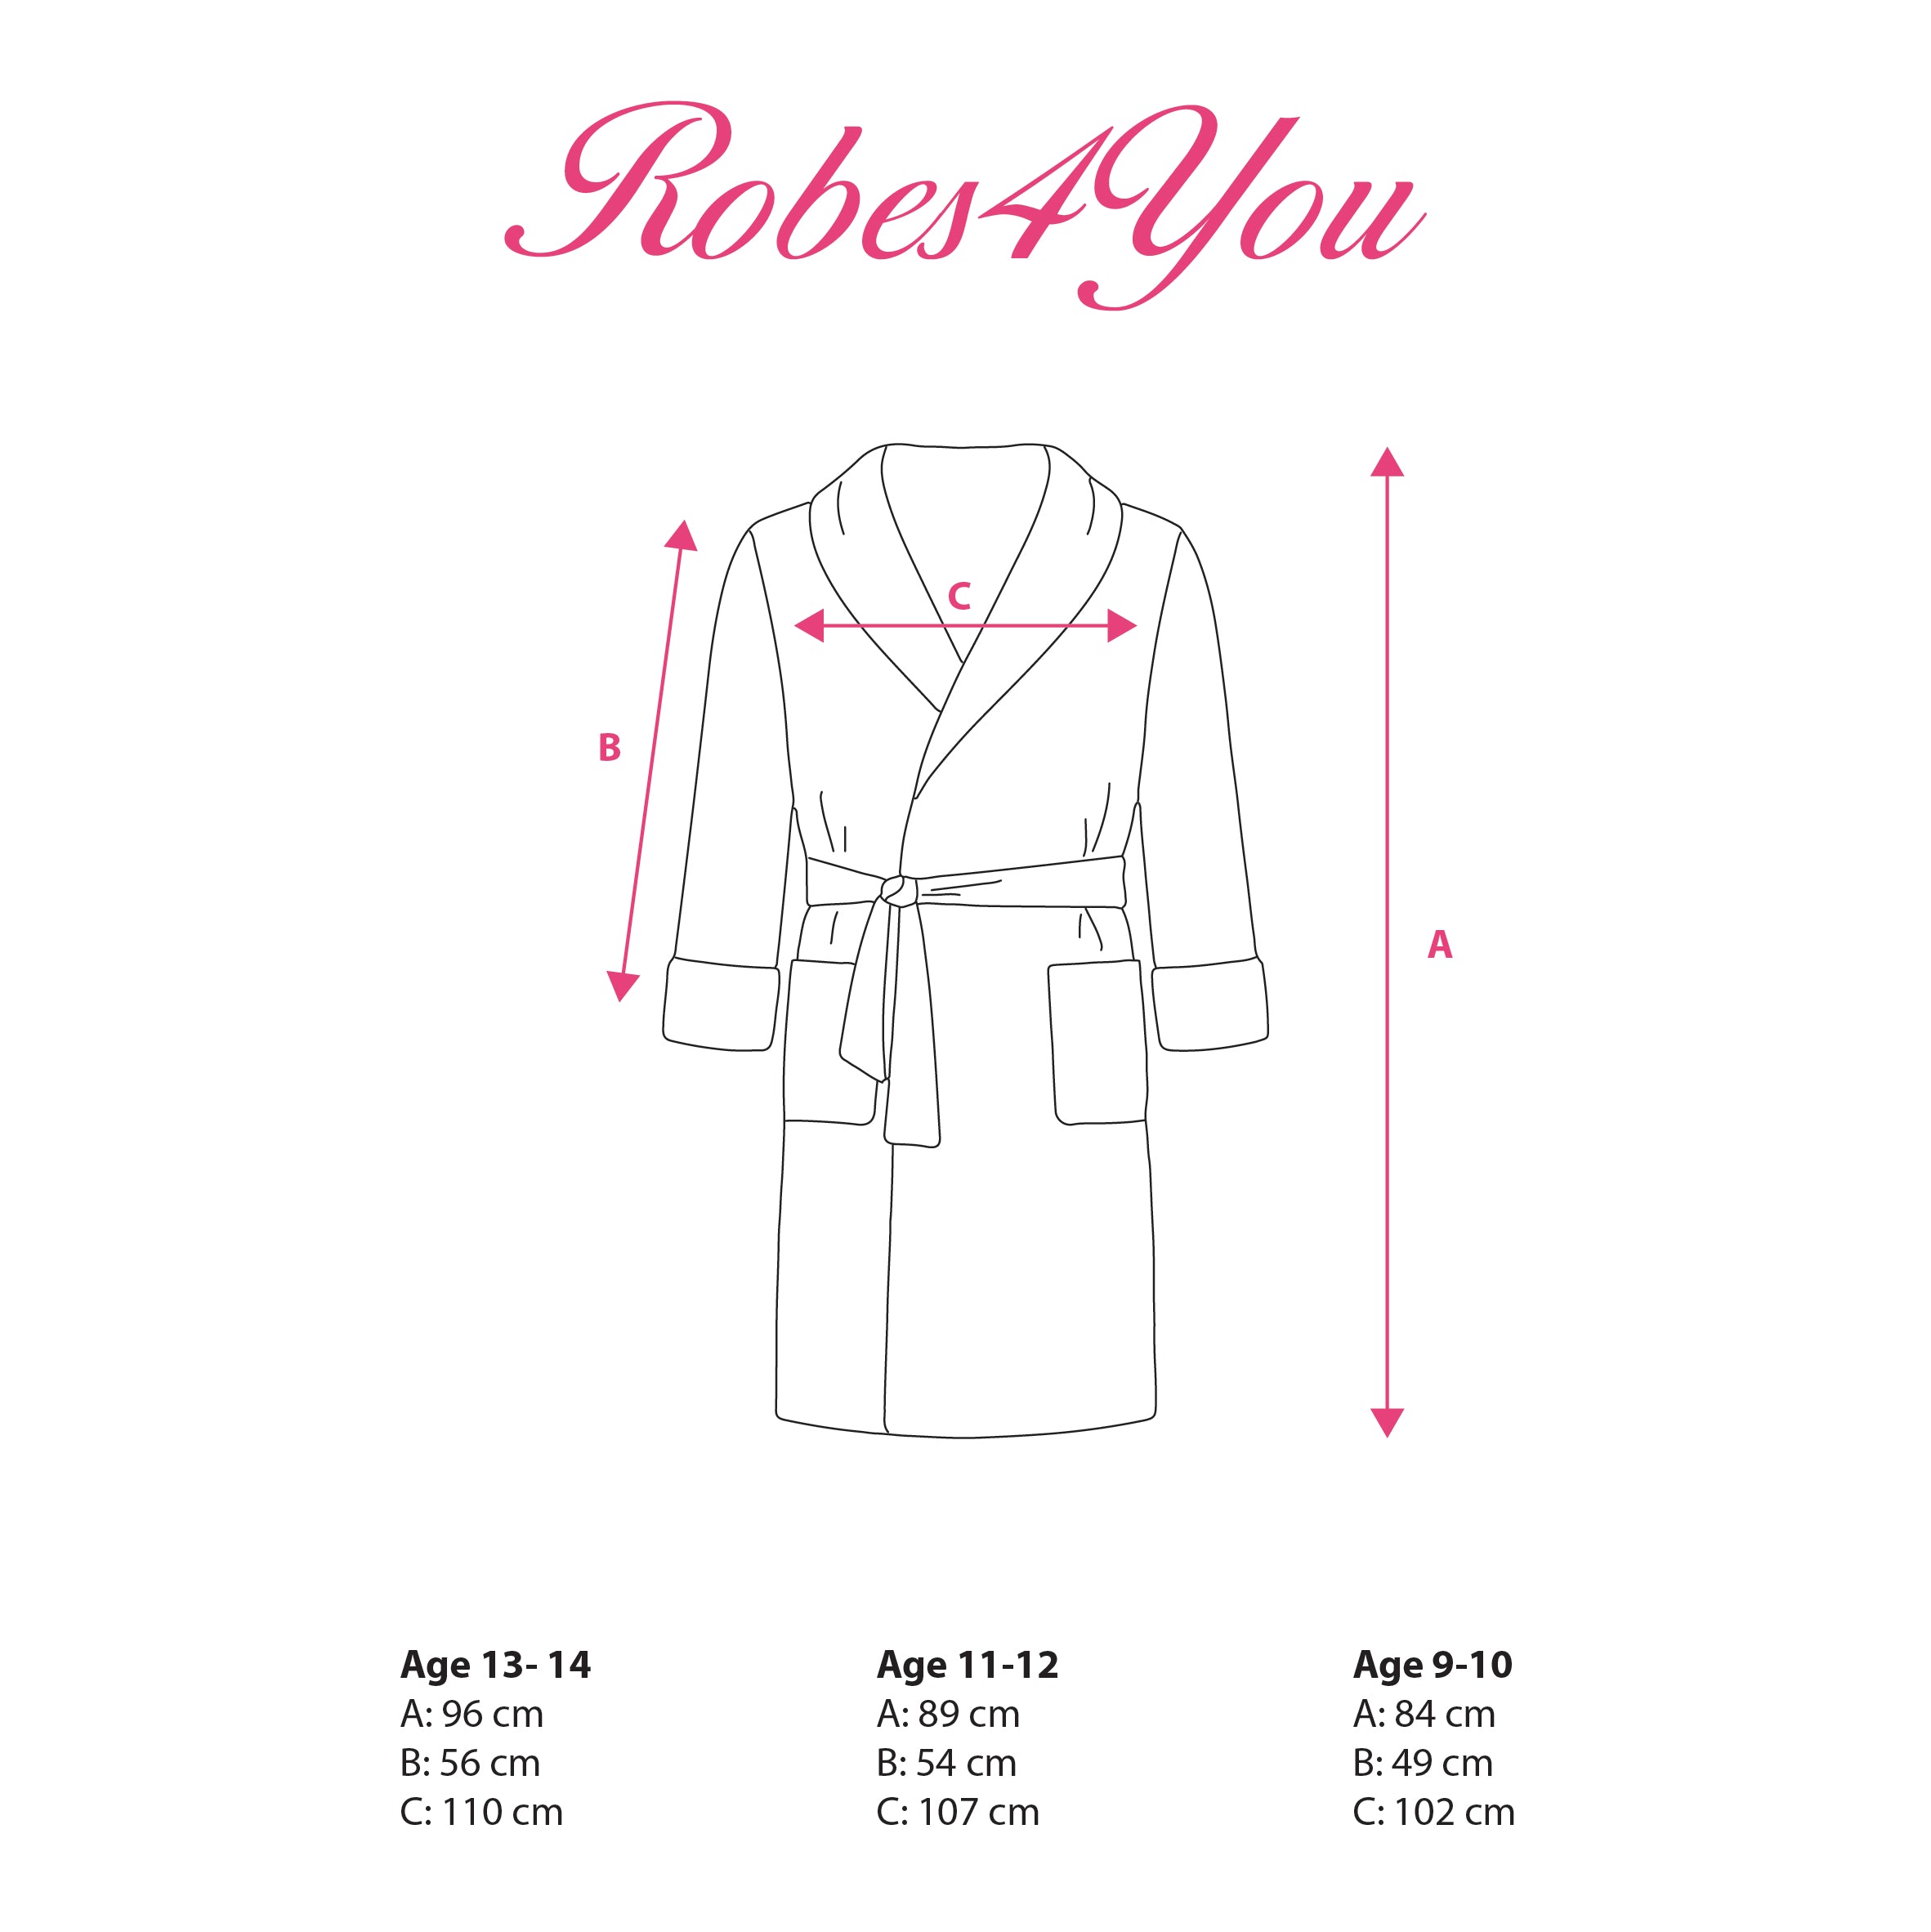 Teenager robe sizing- Robes4you